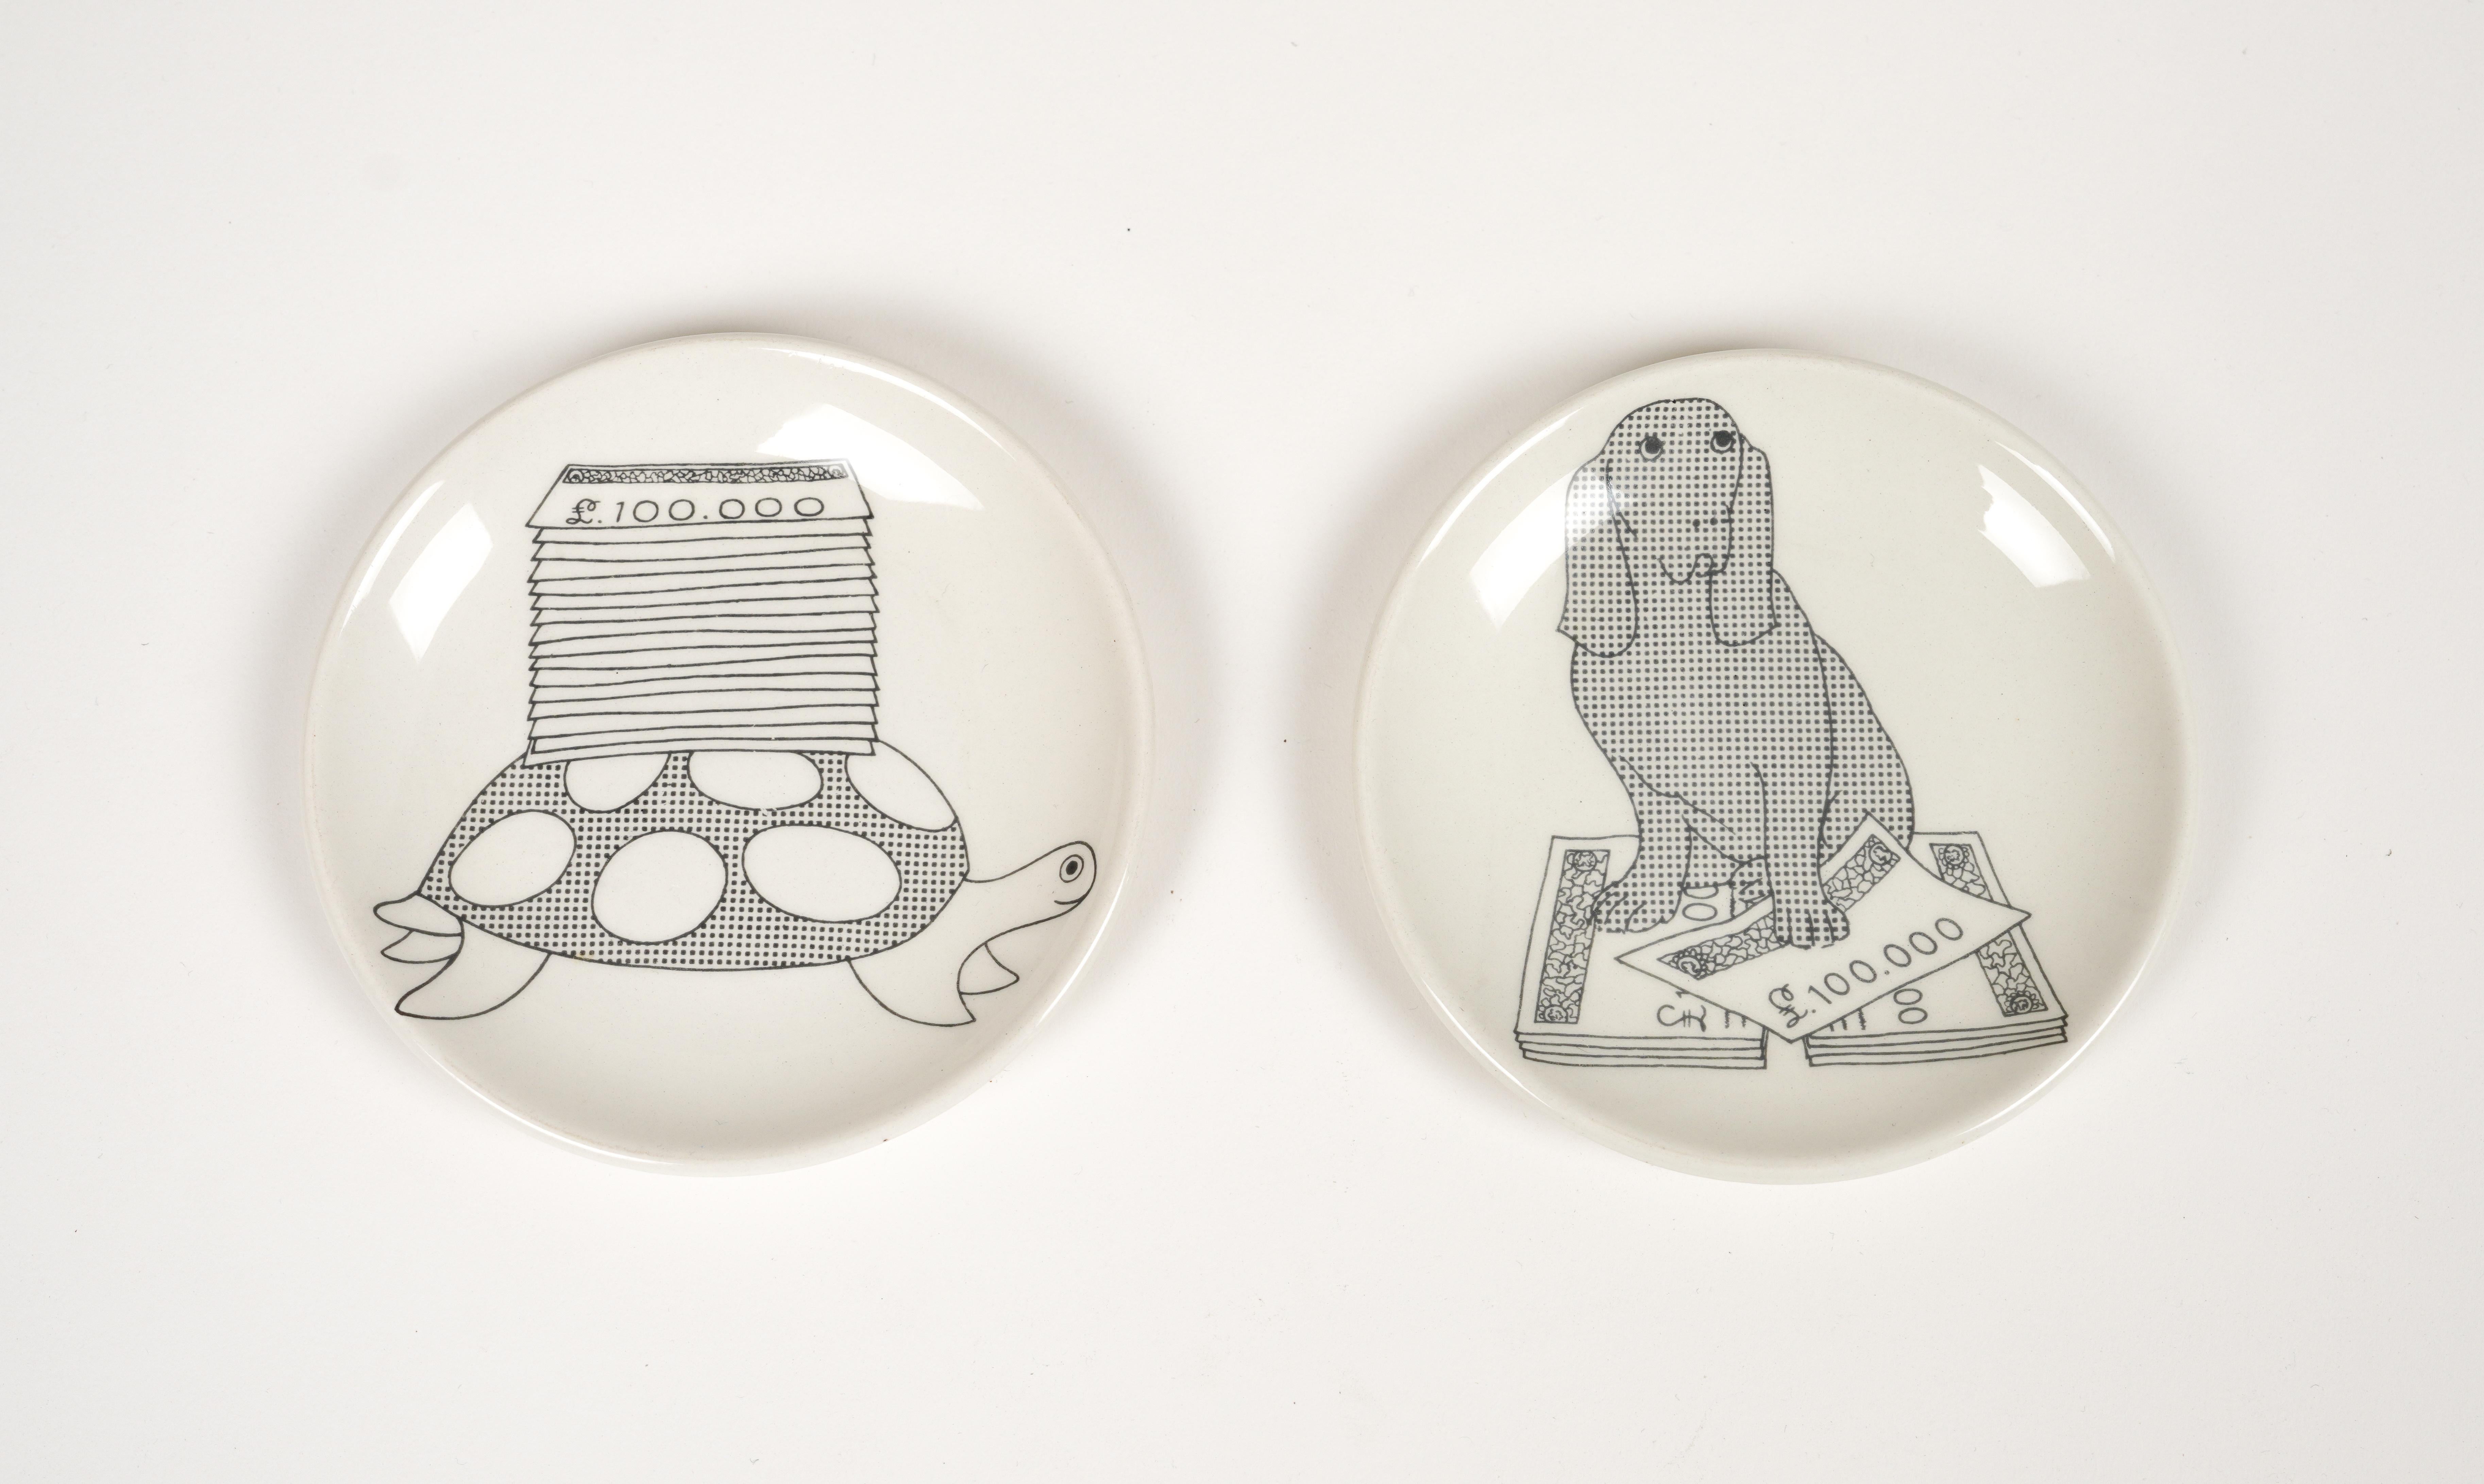 Set of 5 Small Plate or Coasters in Porcelain by Piero Fornasetti, Italy 1950s In Good Condition For Sale In Rome, IT